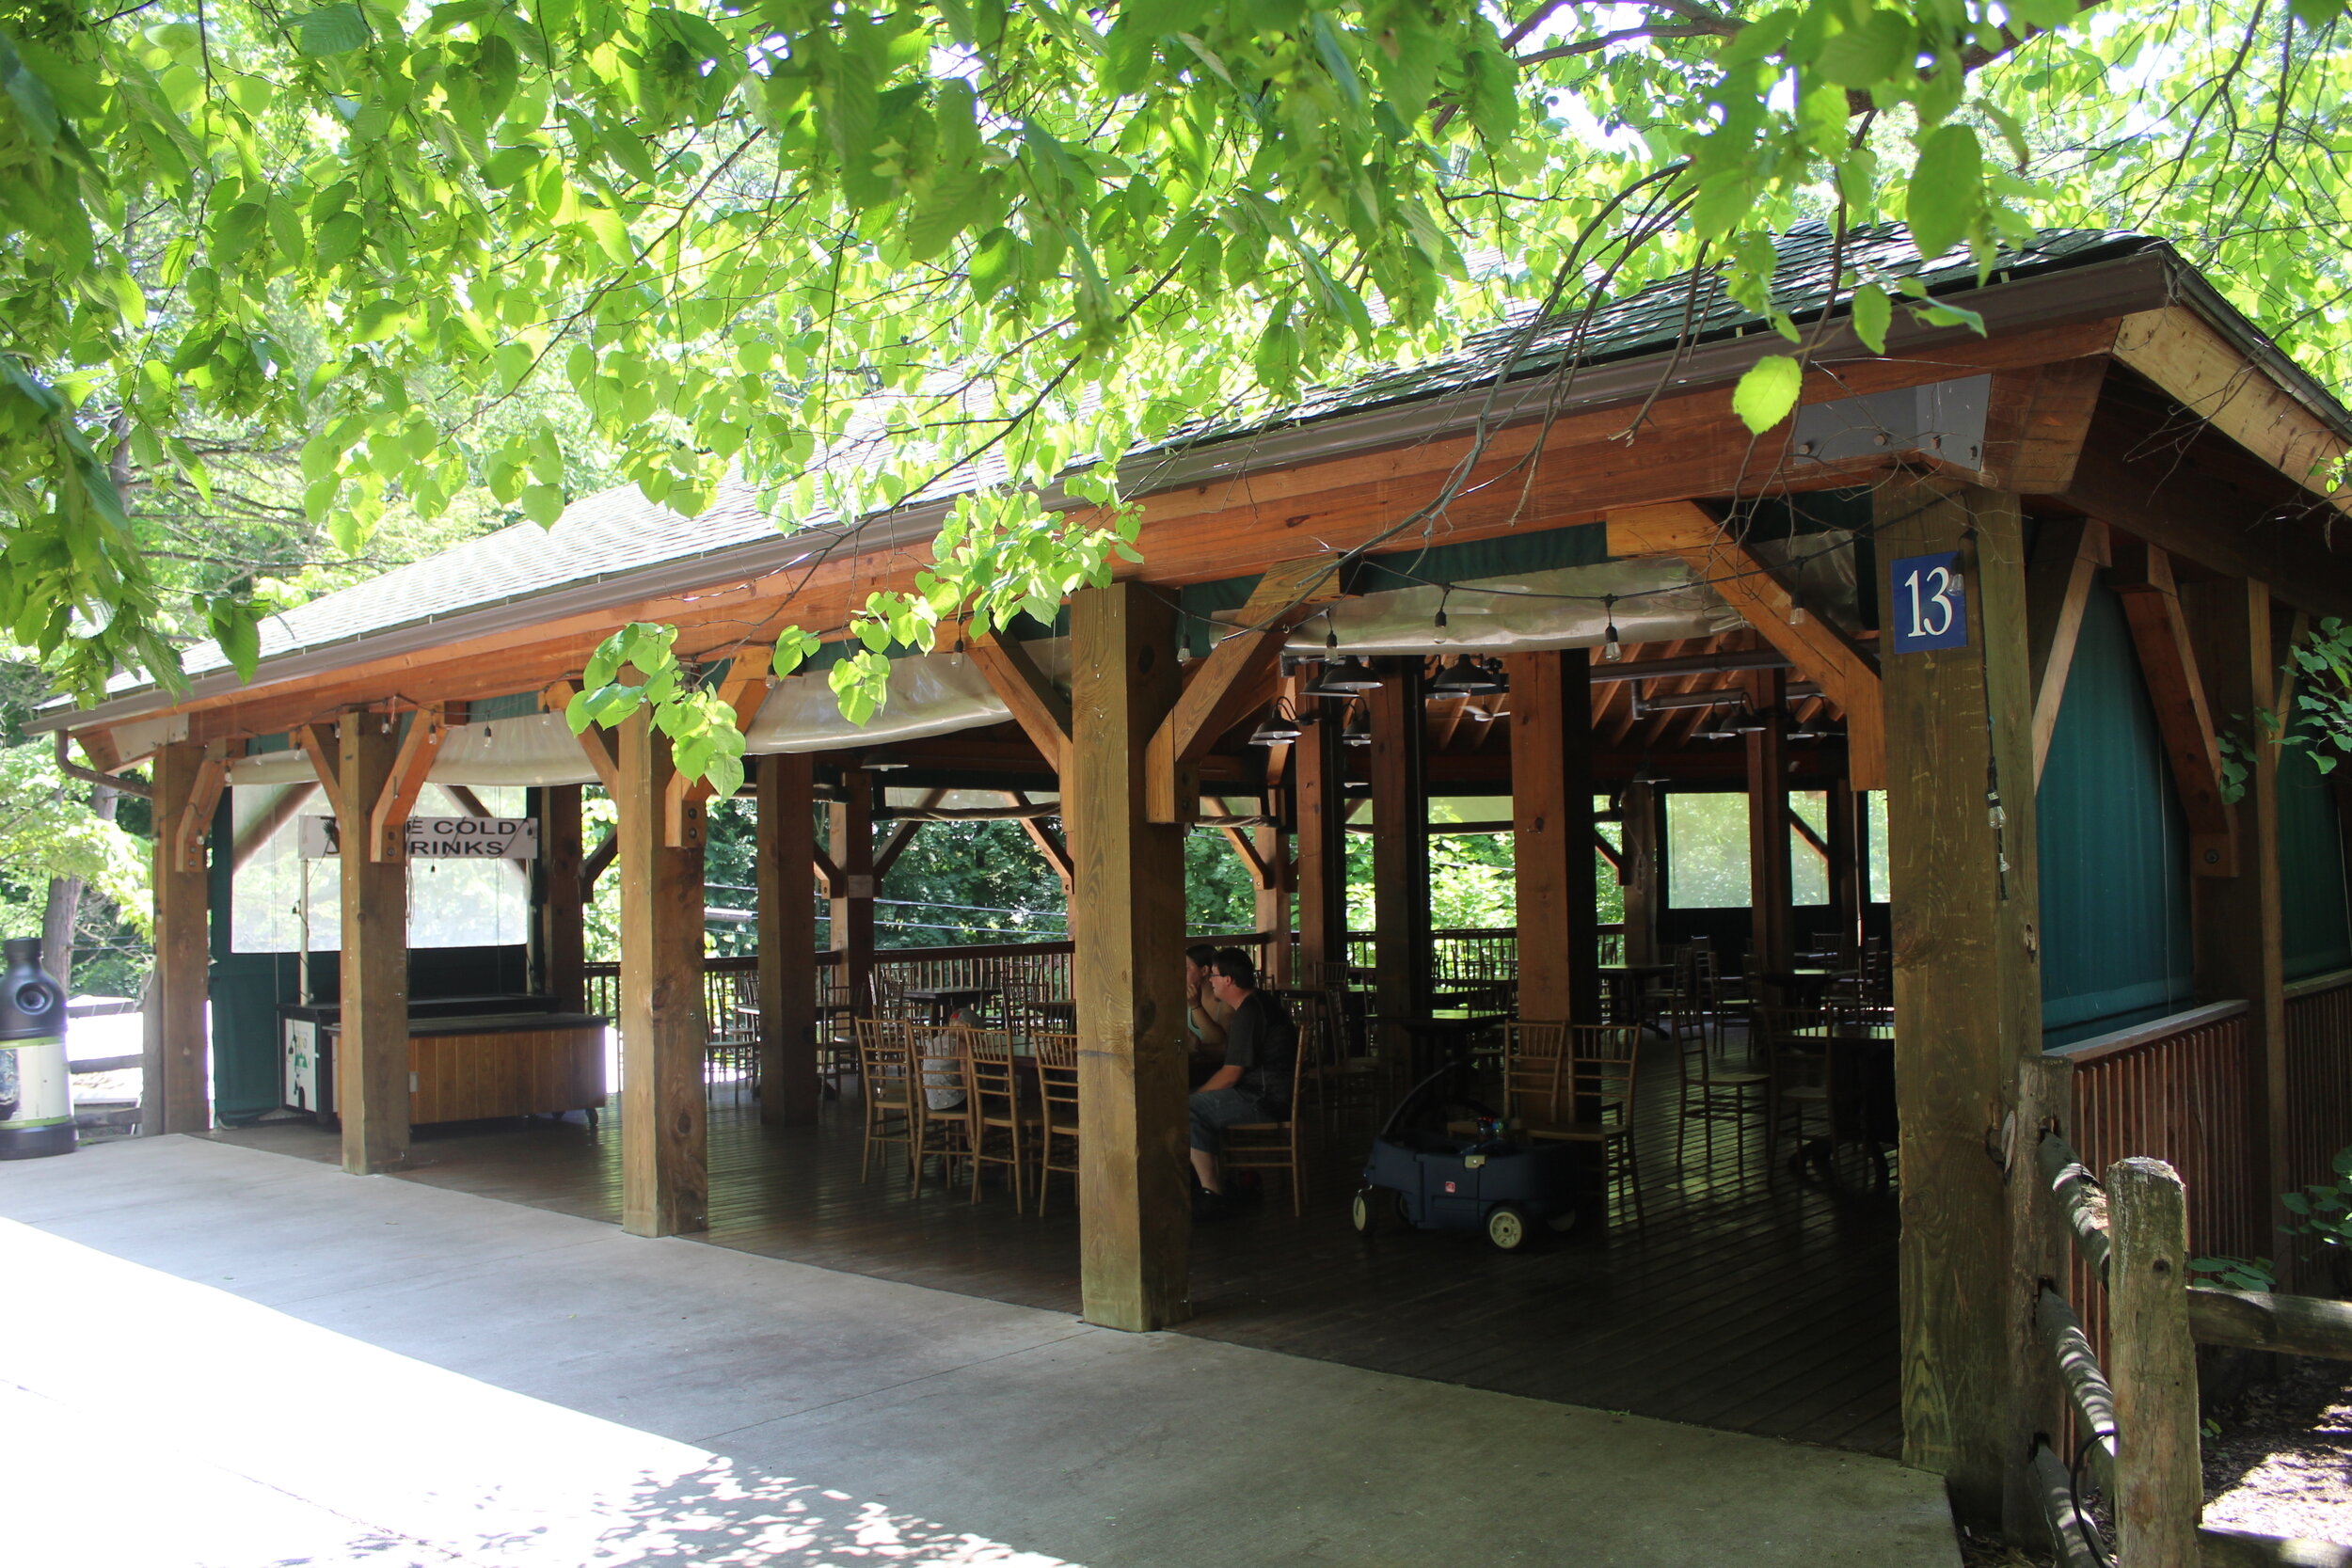  New rustic picnic shelter 